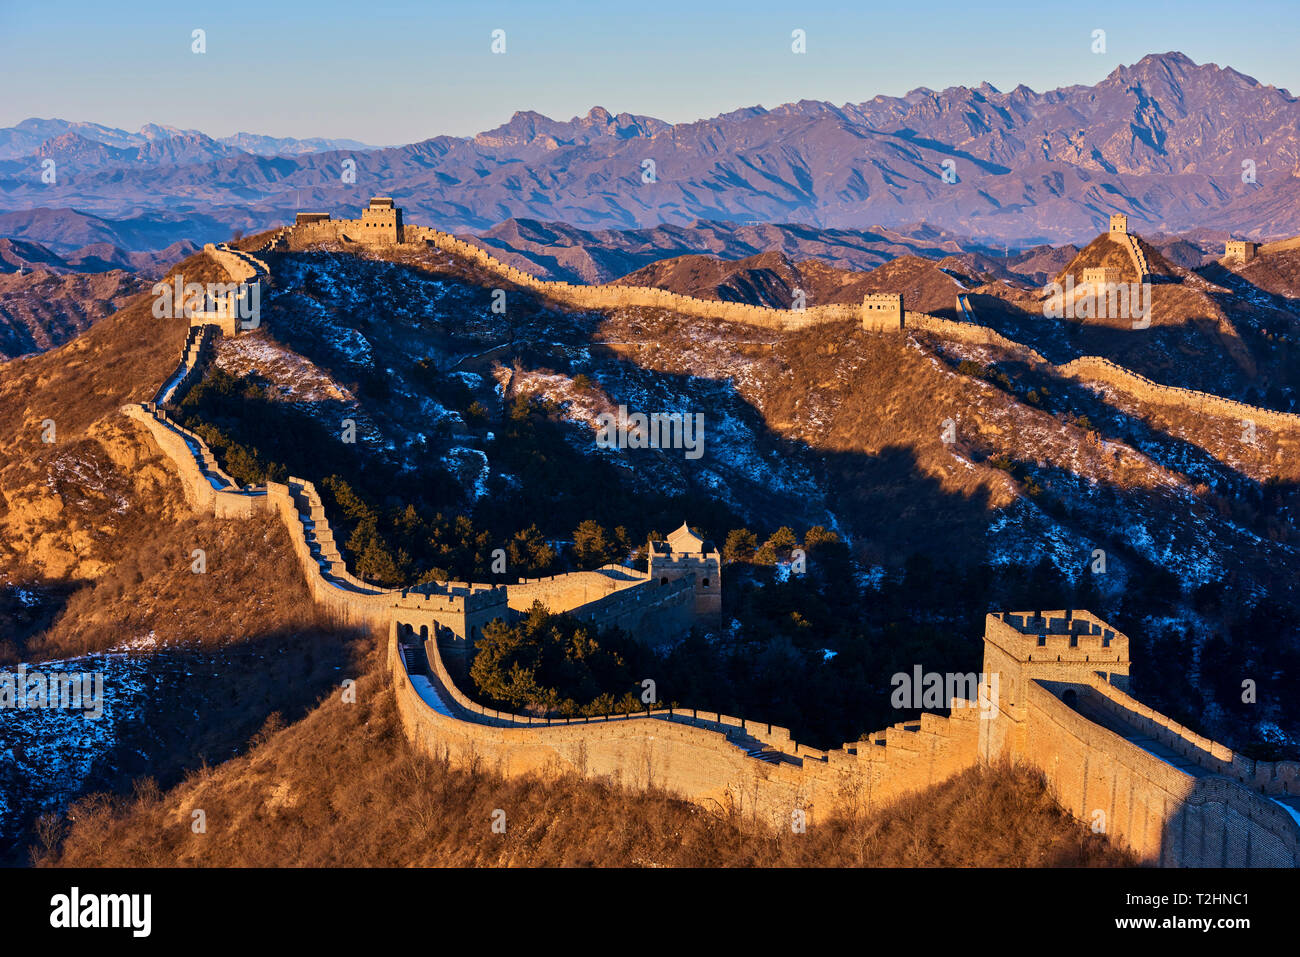 Sunlit Jinshanling and Simatai sections of the Great Wall of China, Unesco World Heritage Site, China, East Asia Stock Photo